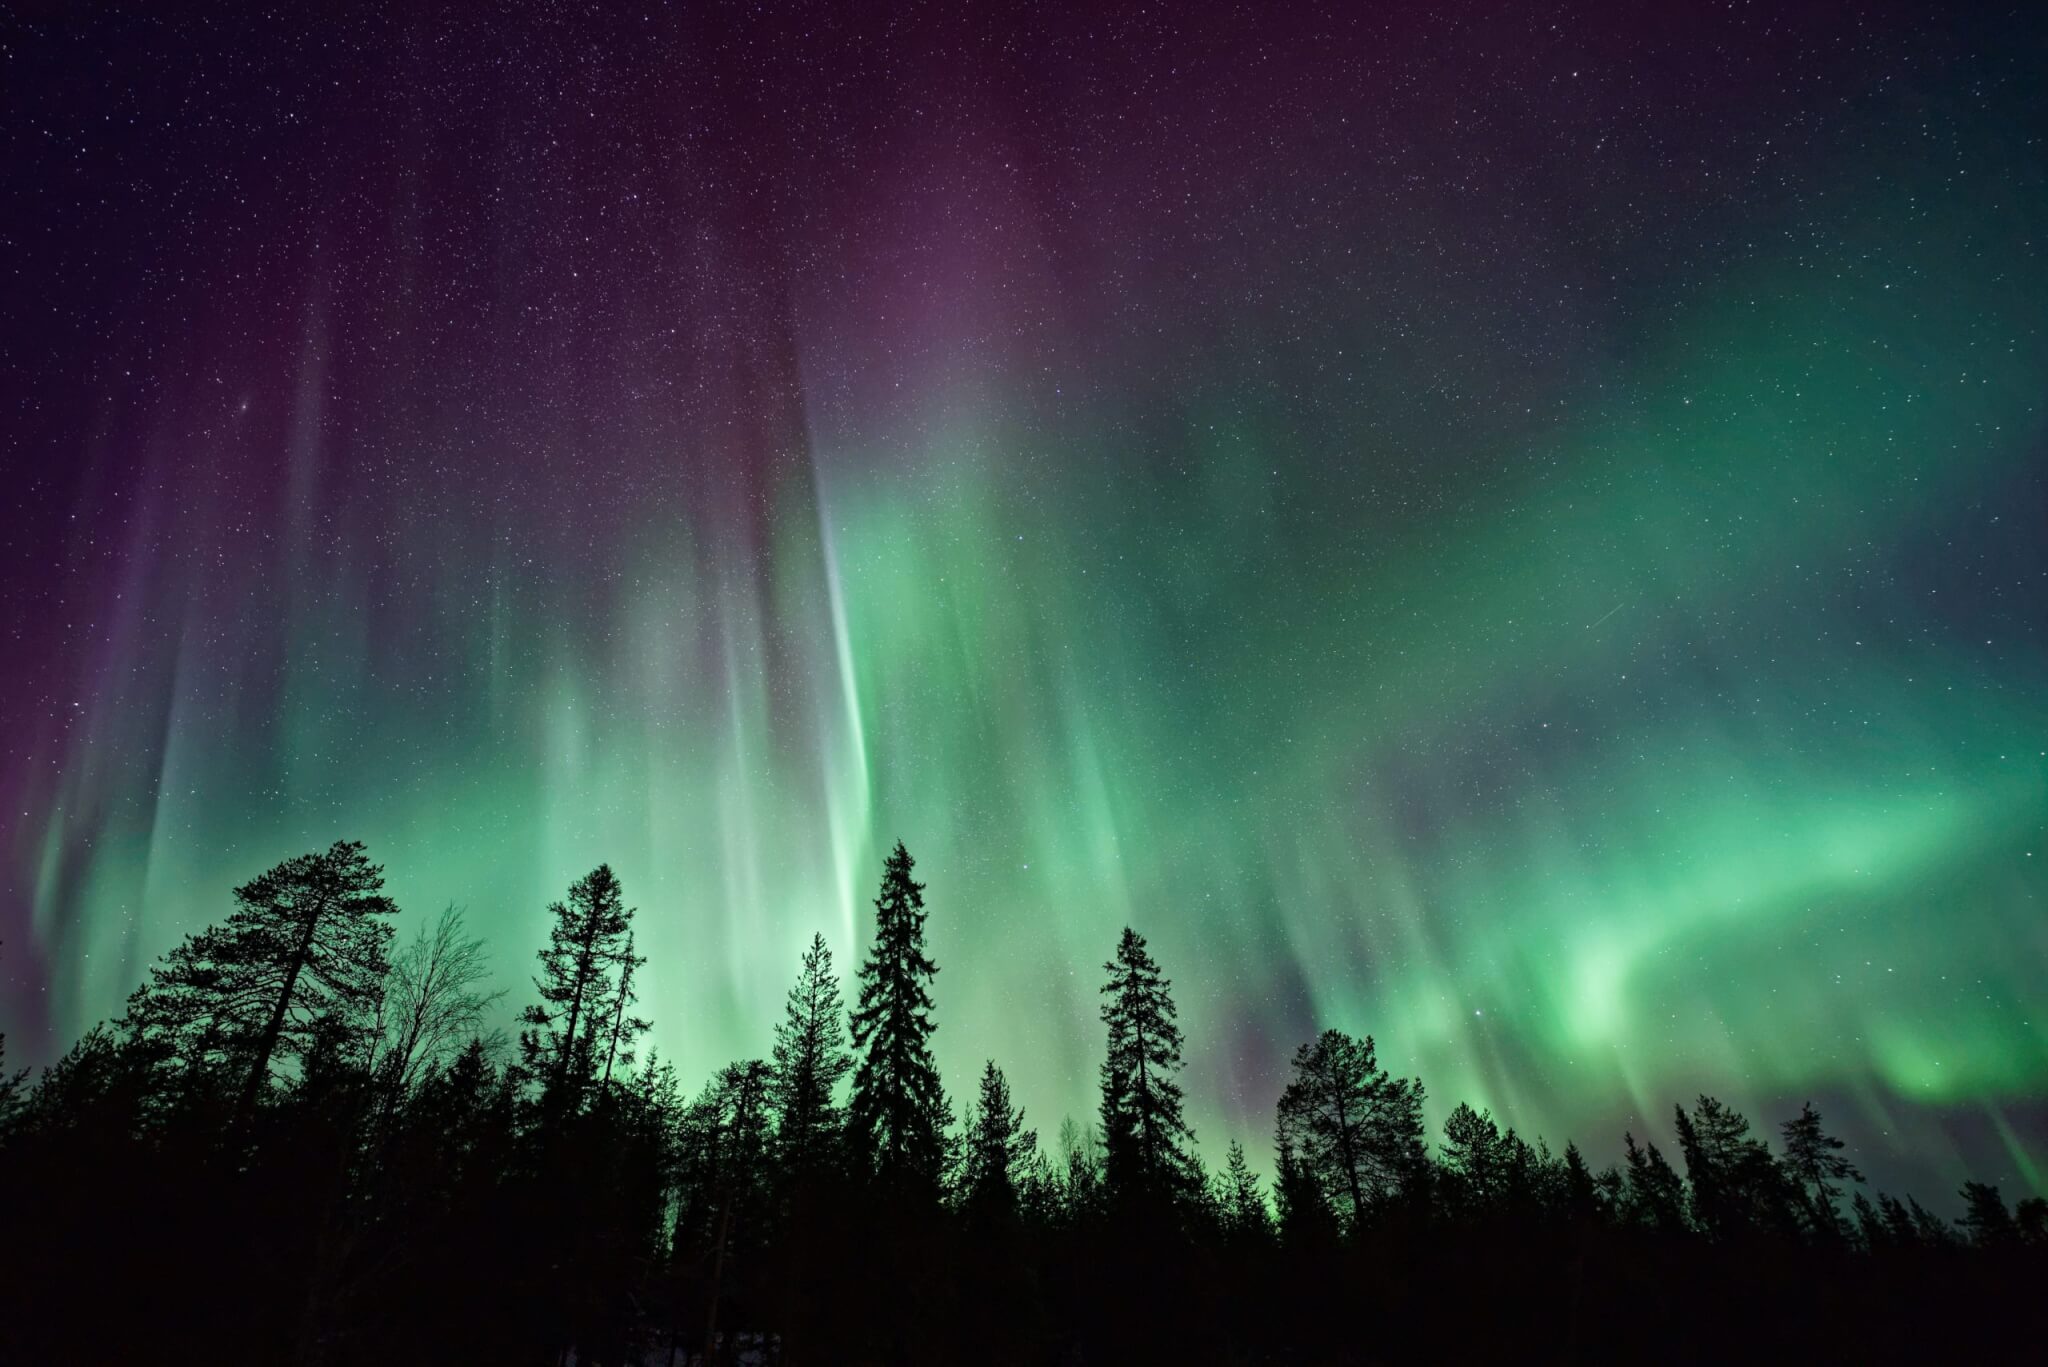 Best Places To See Northern Lights: Top 5 Aurora Borealis Spots Recommended  By Travel Experts - Study Finds